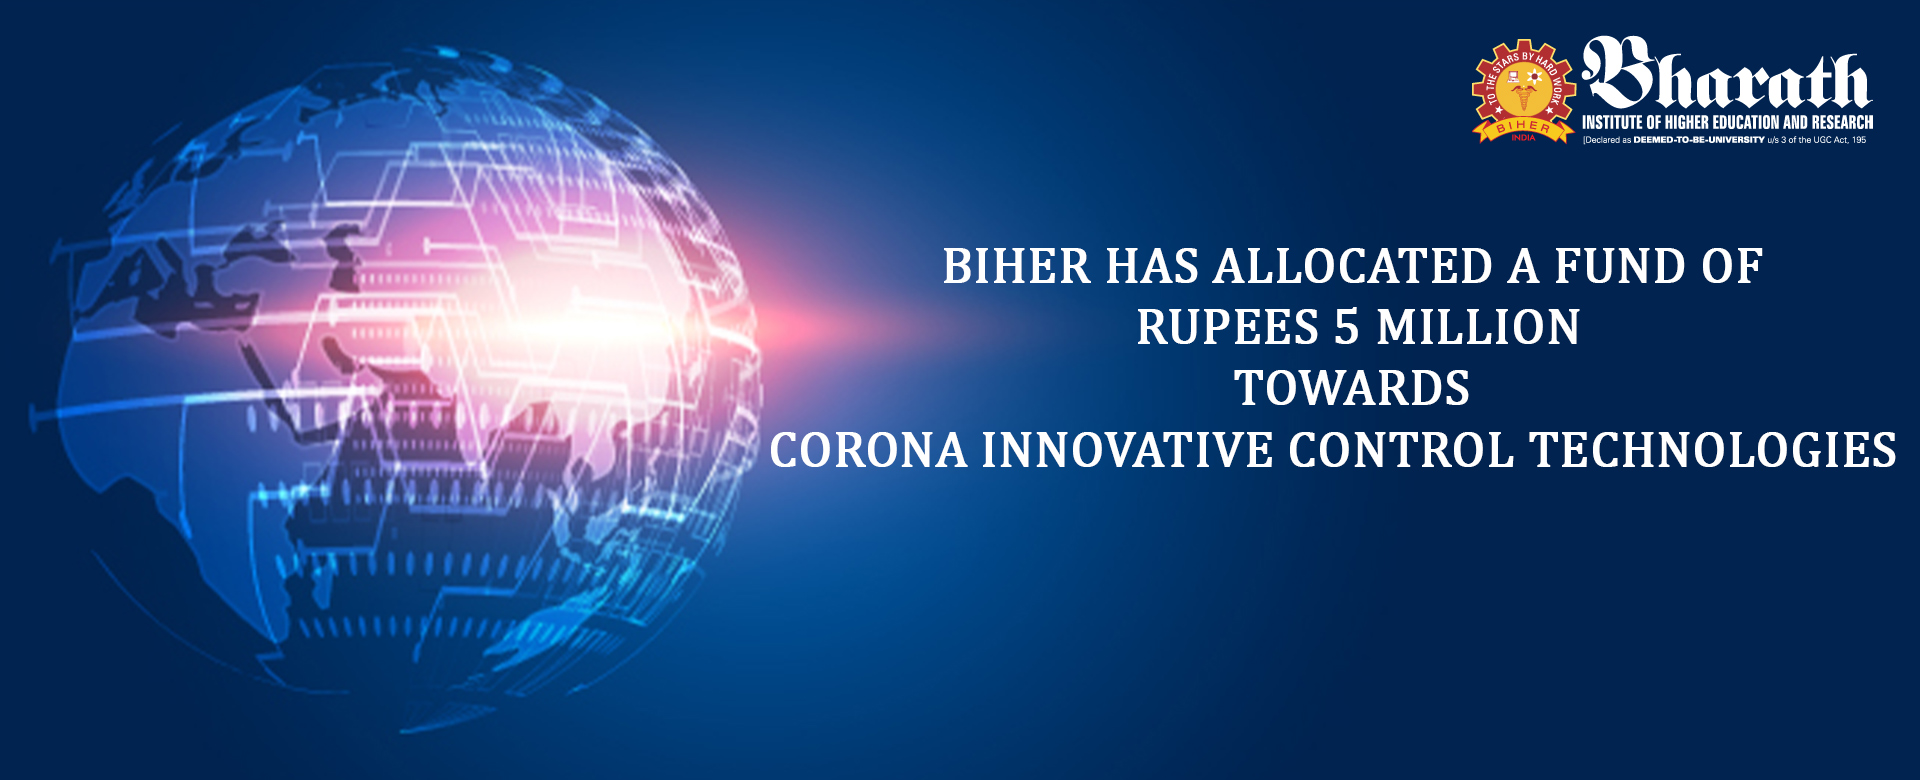 Biher Bharath Institute Of Higher Education And Research